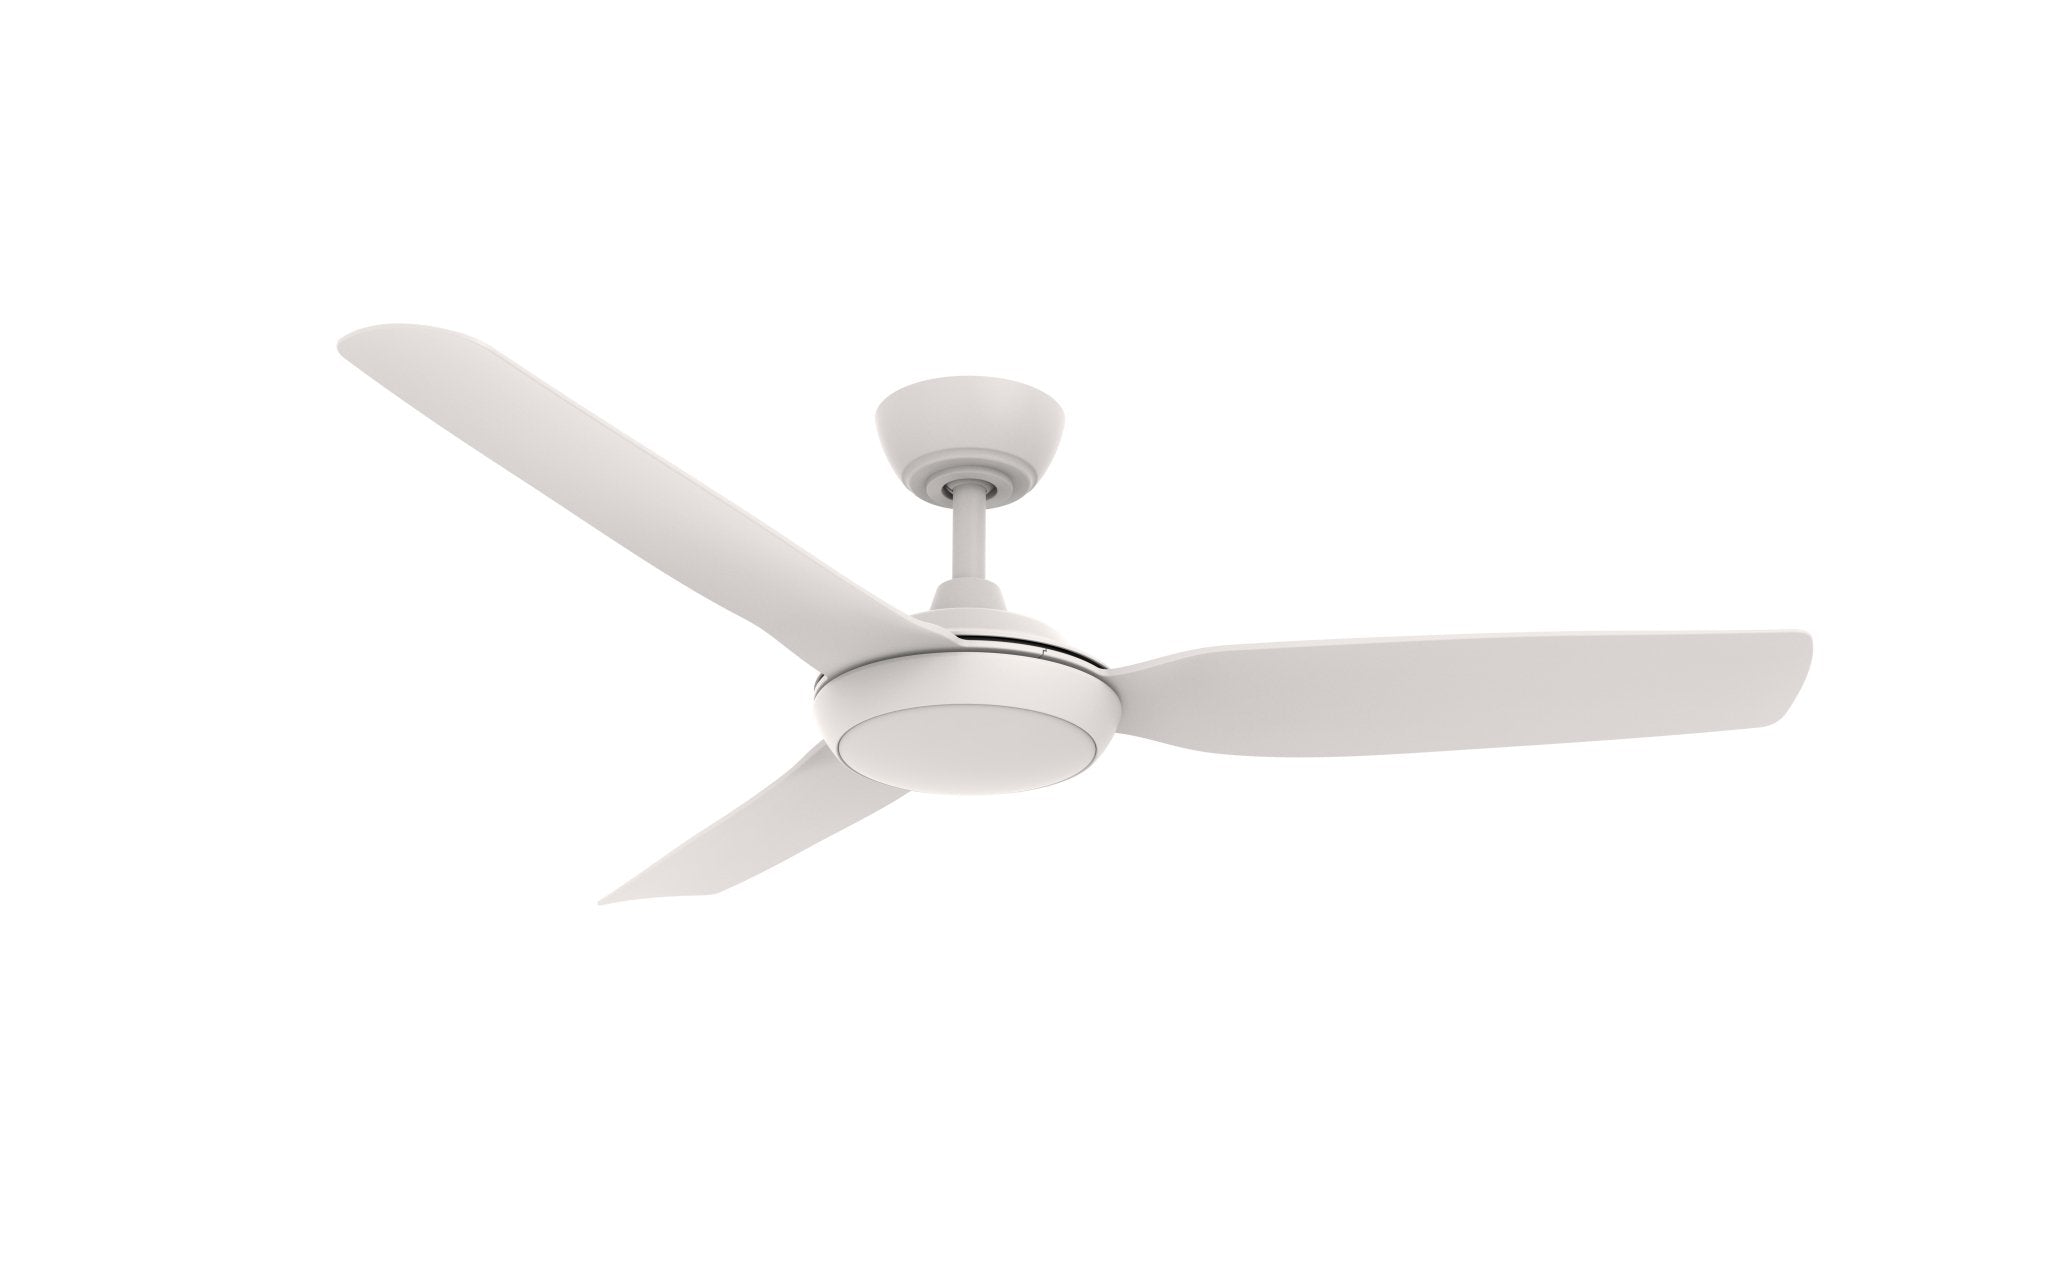 52" Viper DC Ceiling Fan White Satin 3 Blade With Light by Martec Lighting - Mases LightingMartec